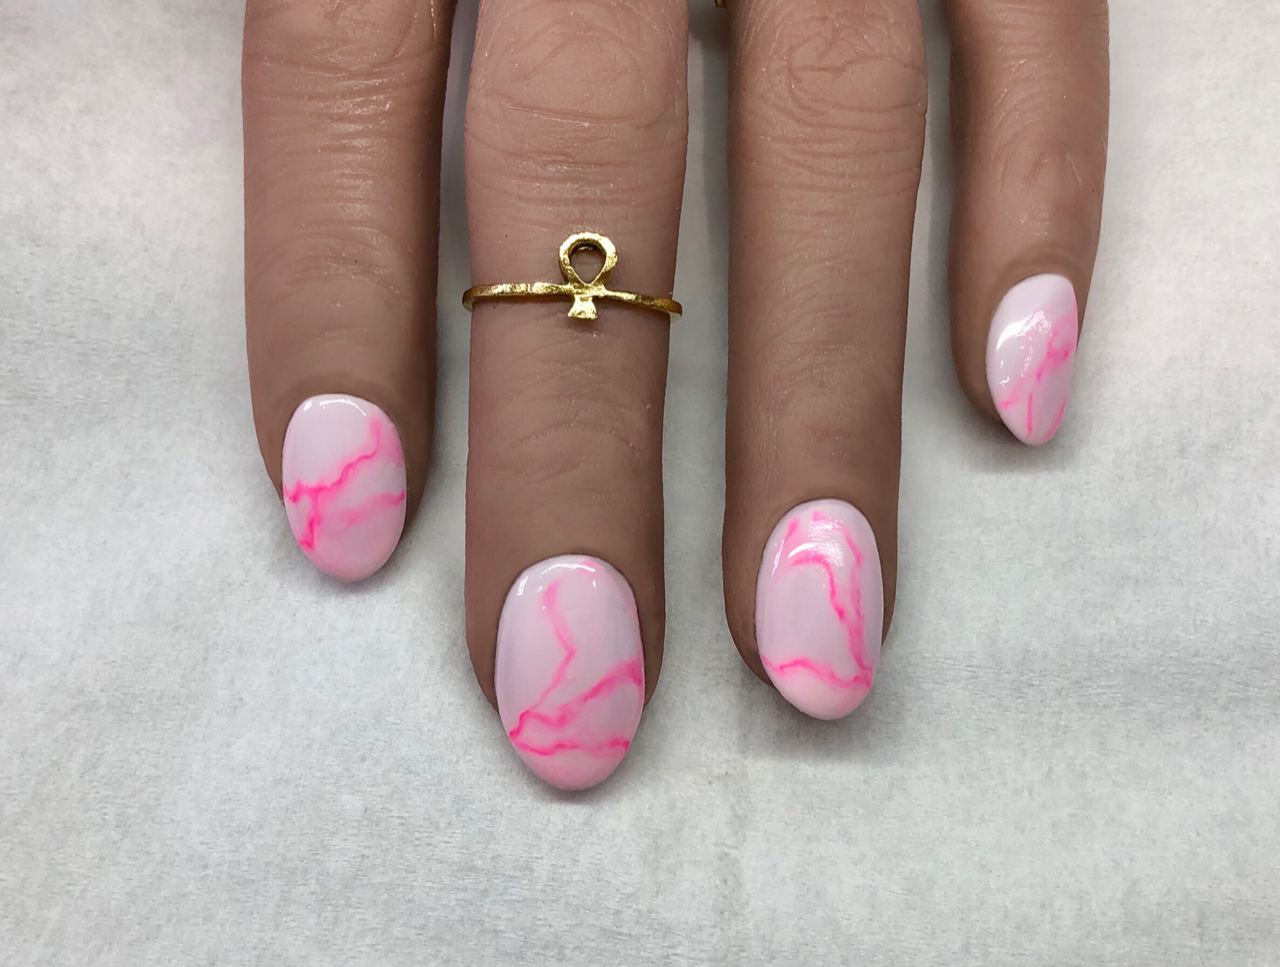 Salon System Gellux Breast Cancer Awareness Month Nails